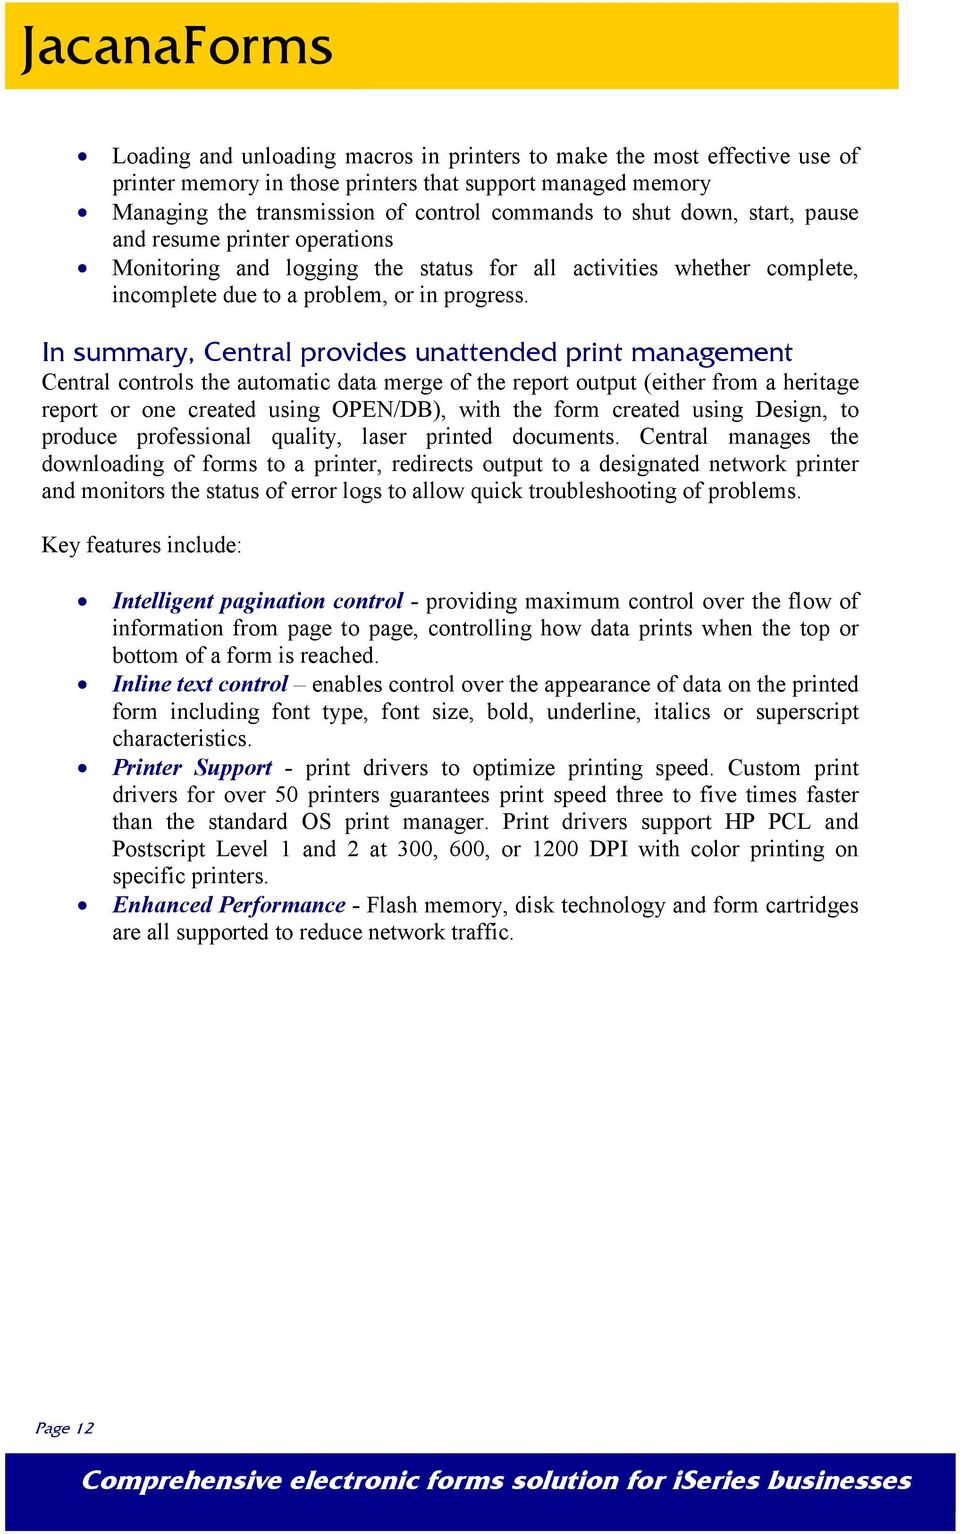 In summary, Central provides unattended print management Central controls the automatic data merge of the report output (either from a heritage report or one created using OPEN/DB), with the form